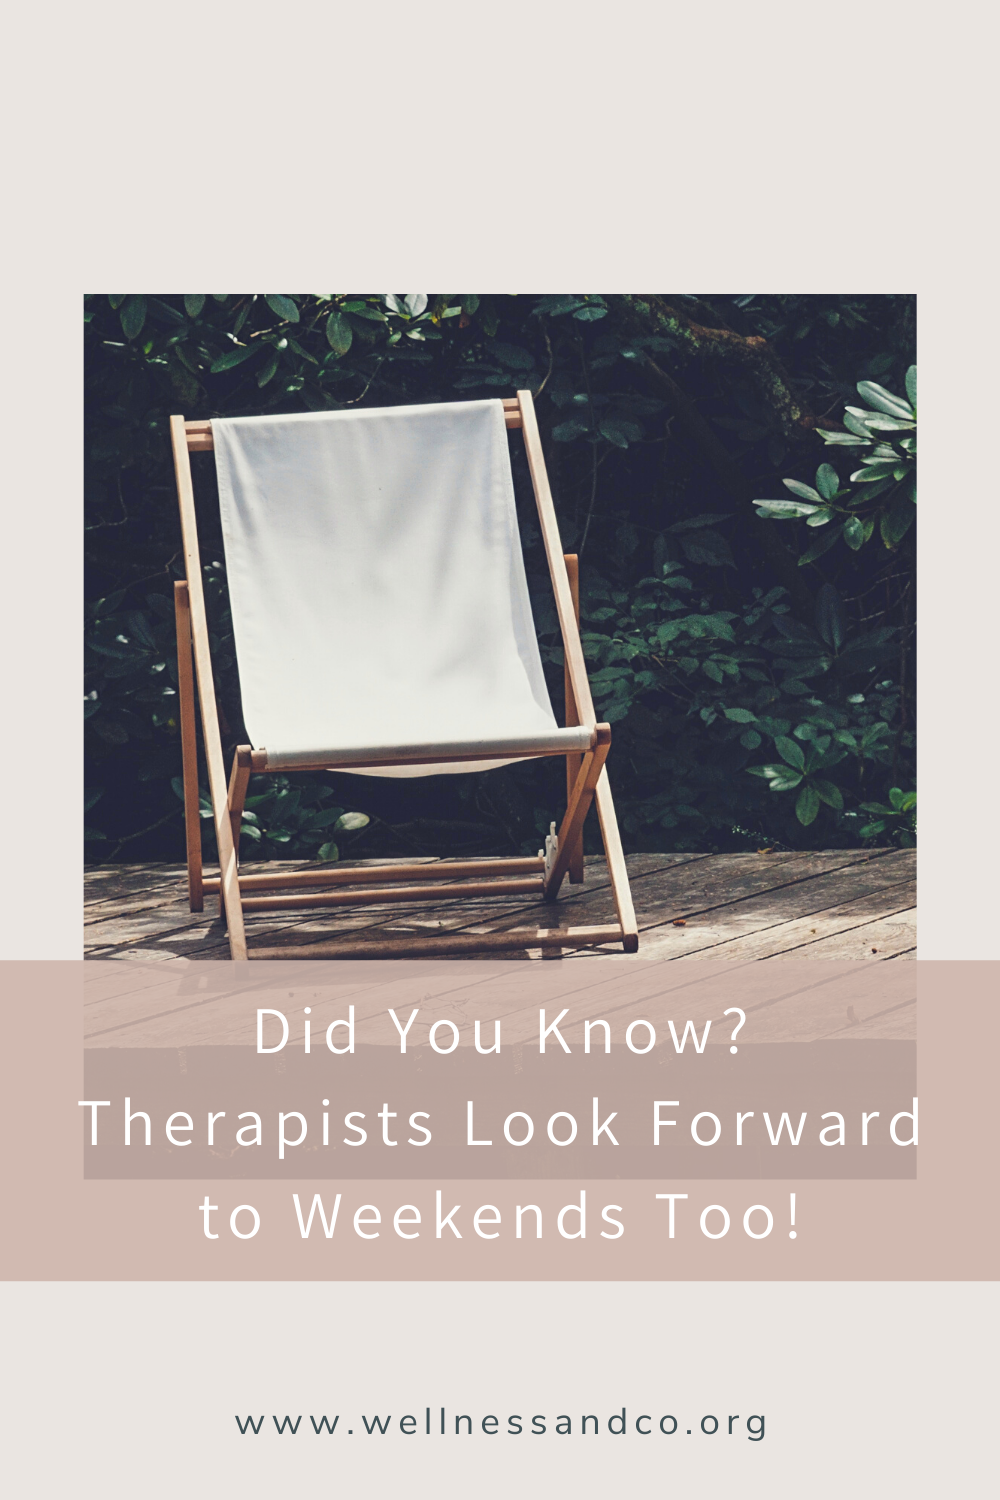 Did You Know? Therapists Look Forward to Weekends Too! | This poem aligns therapists with the rest of the world. We are humans who look forward to the weekend, too! Take a look through the eyes of a therapist about the process of thinking and connecting with clients all week and getting a break on the weekend.